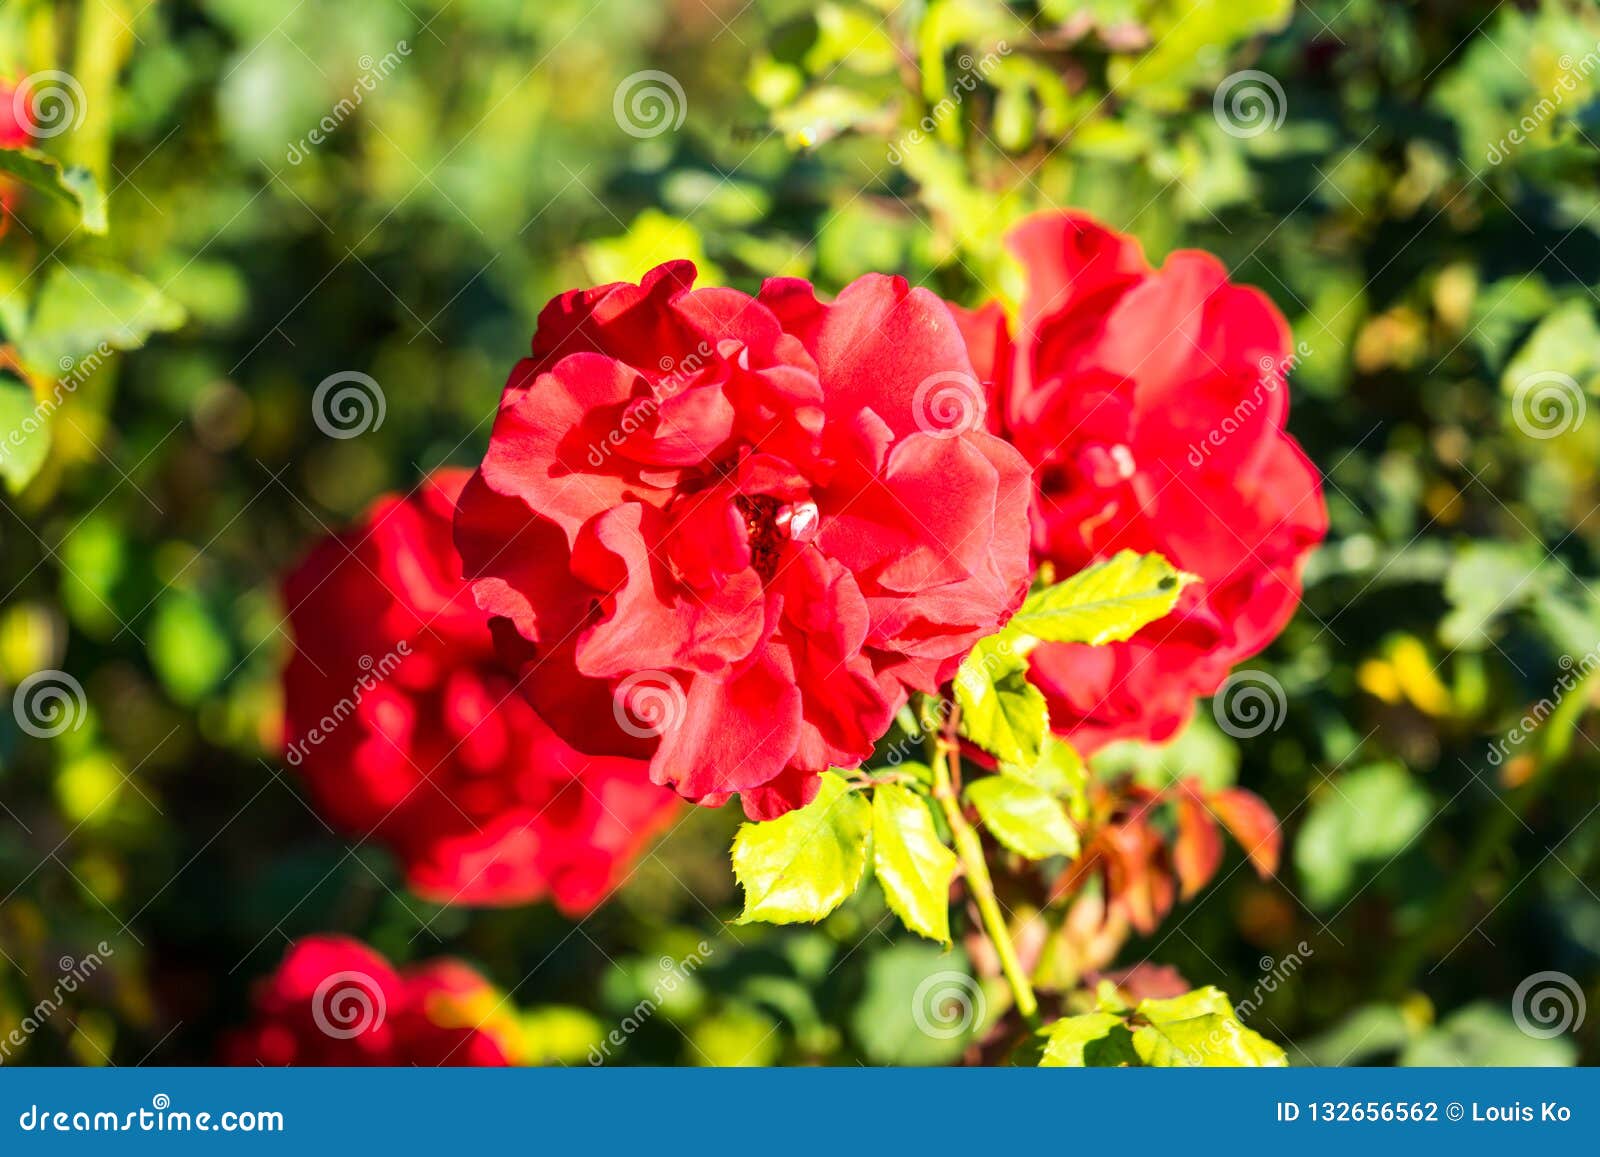 Red Roses Blurry Background In Rose Gardens Stock Photo Image Of